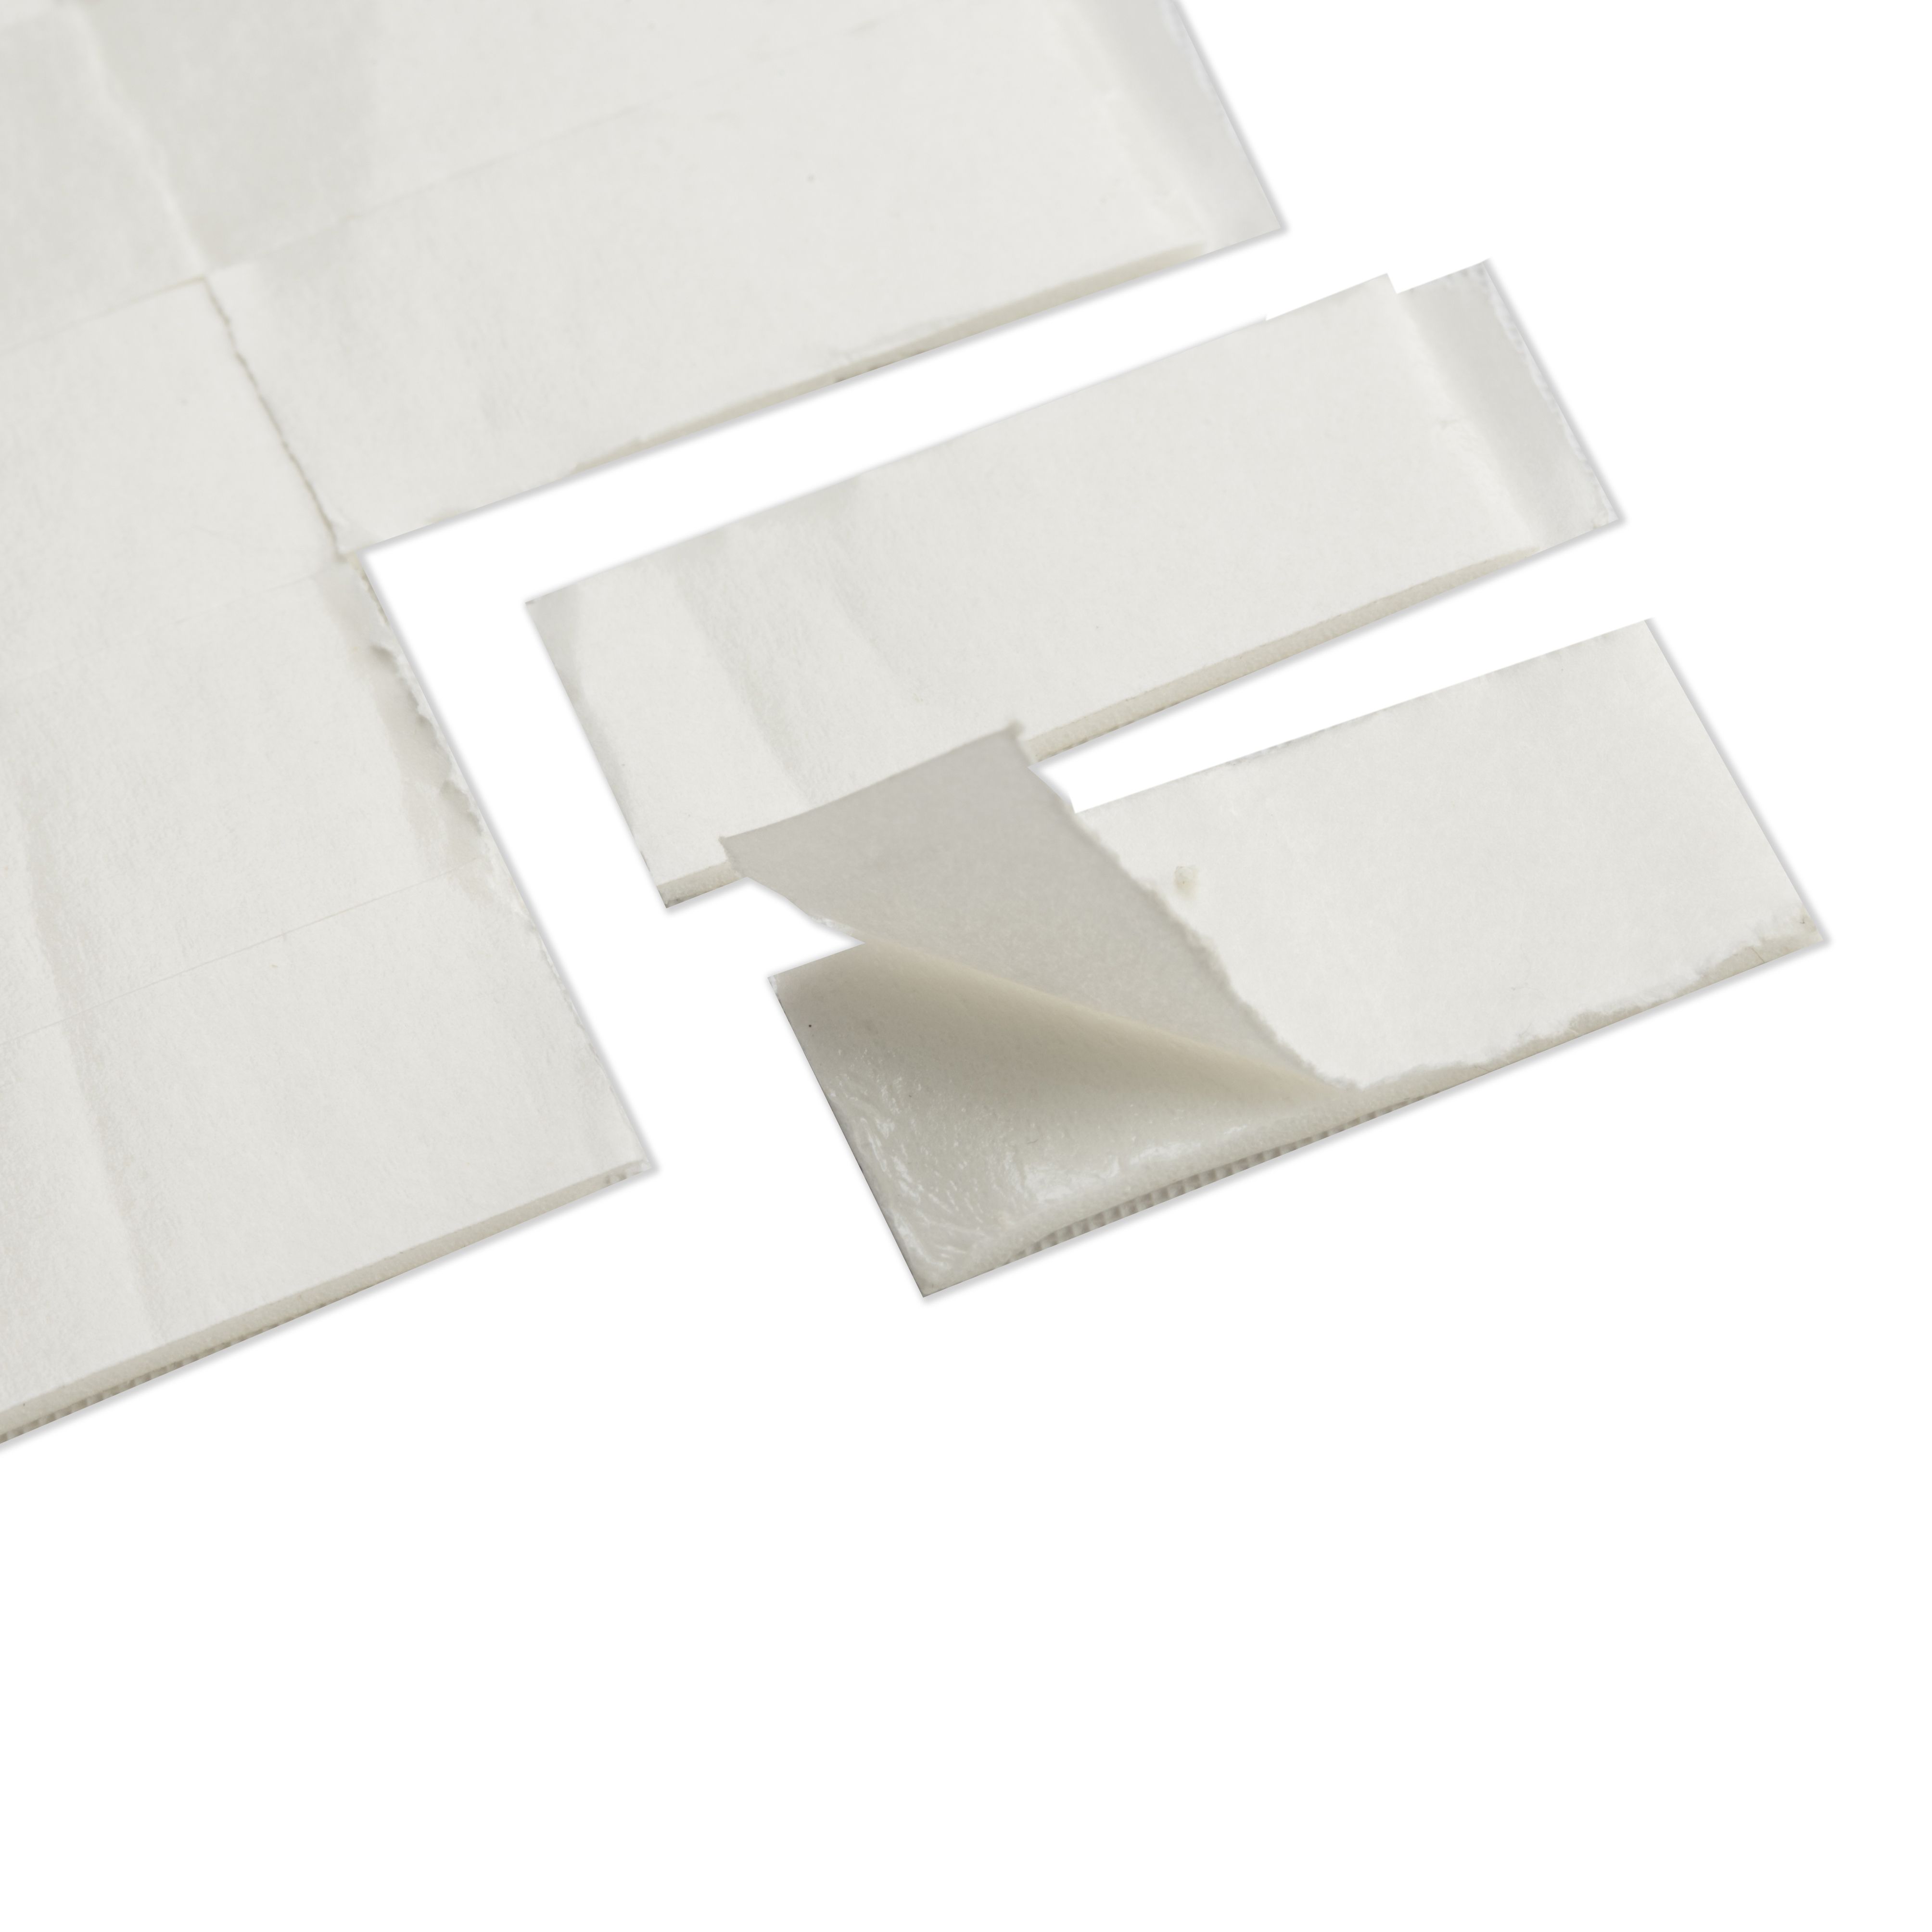 White Mounting Adhesive pad (L)25mm (W)11mm, Pack of 24